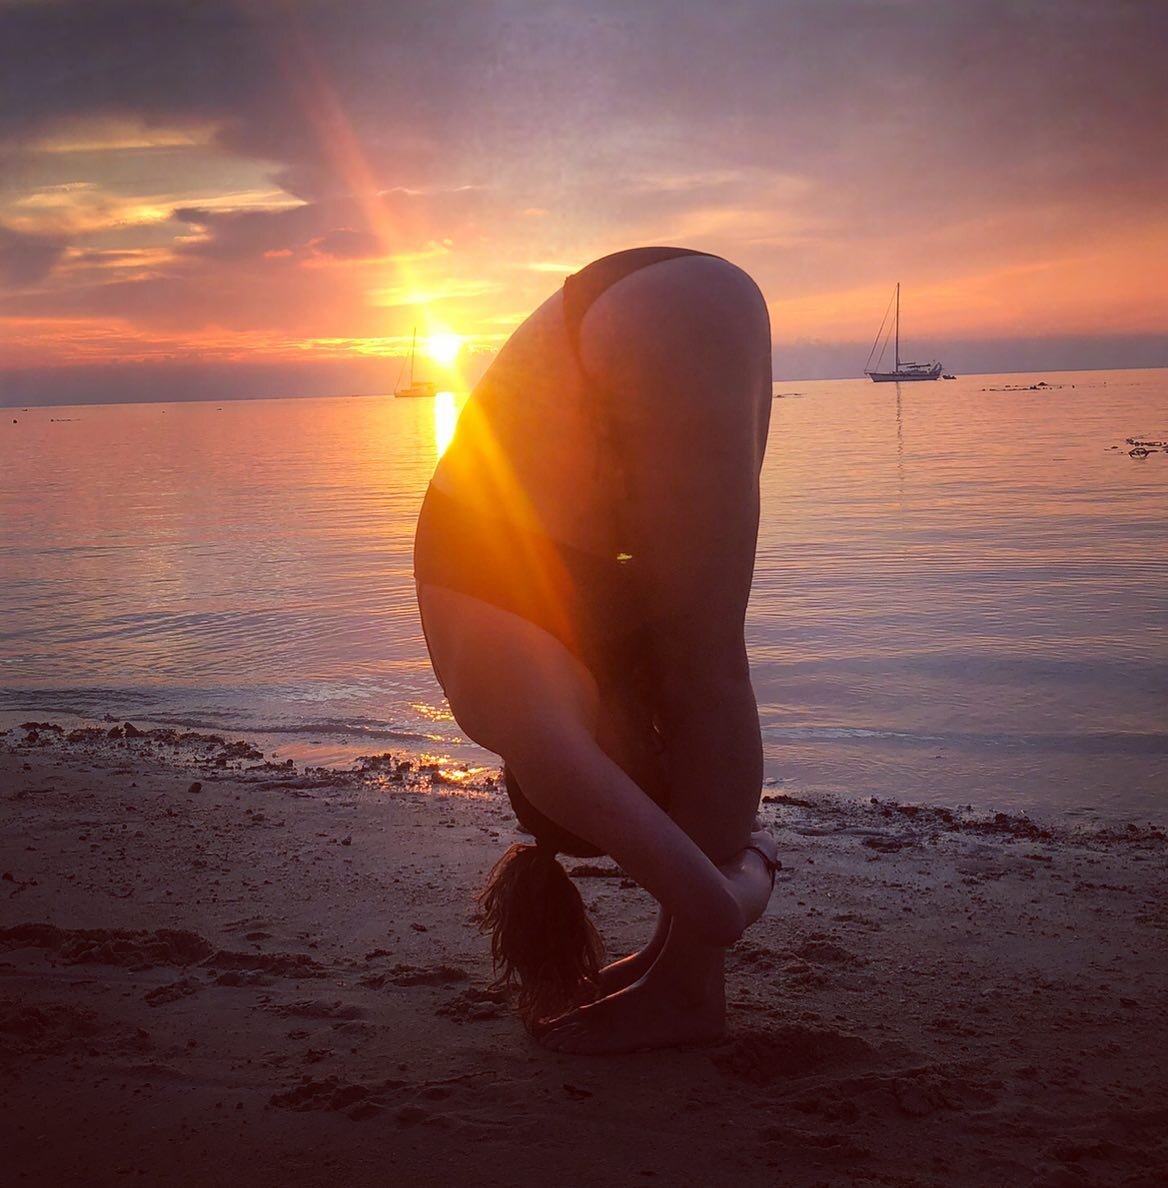 Uttanasana : Standing forward fold. 
Draping the body over the legs into an inversion is a calming pose as the mind draws inward allowing us to tune out the noise of the world. 

Wishing I was back on this beach in Thailand, pulling some shapes, and 